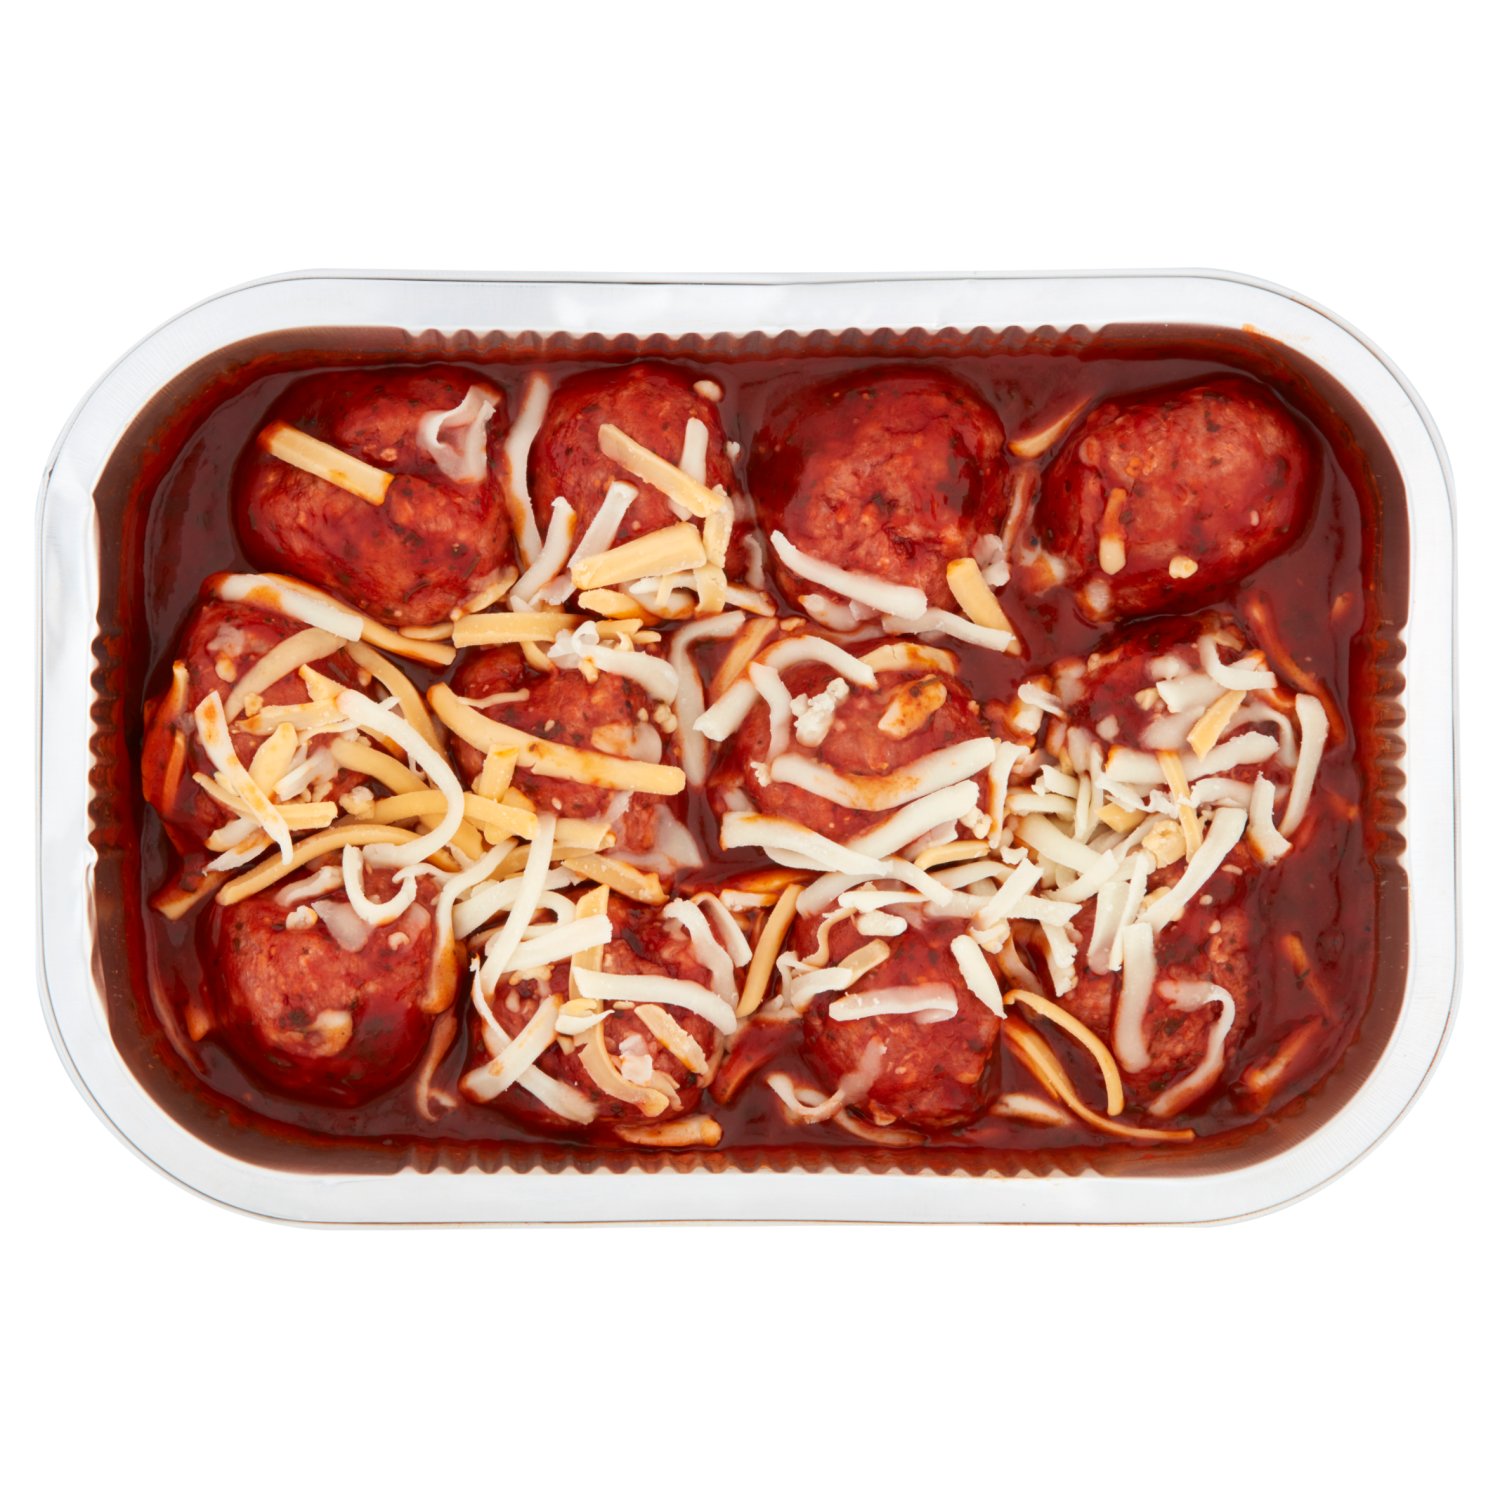 Prepared By Our Butcher Italian Style Irish Beef Meatballs With Tomato Sauce (1 Piece)